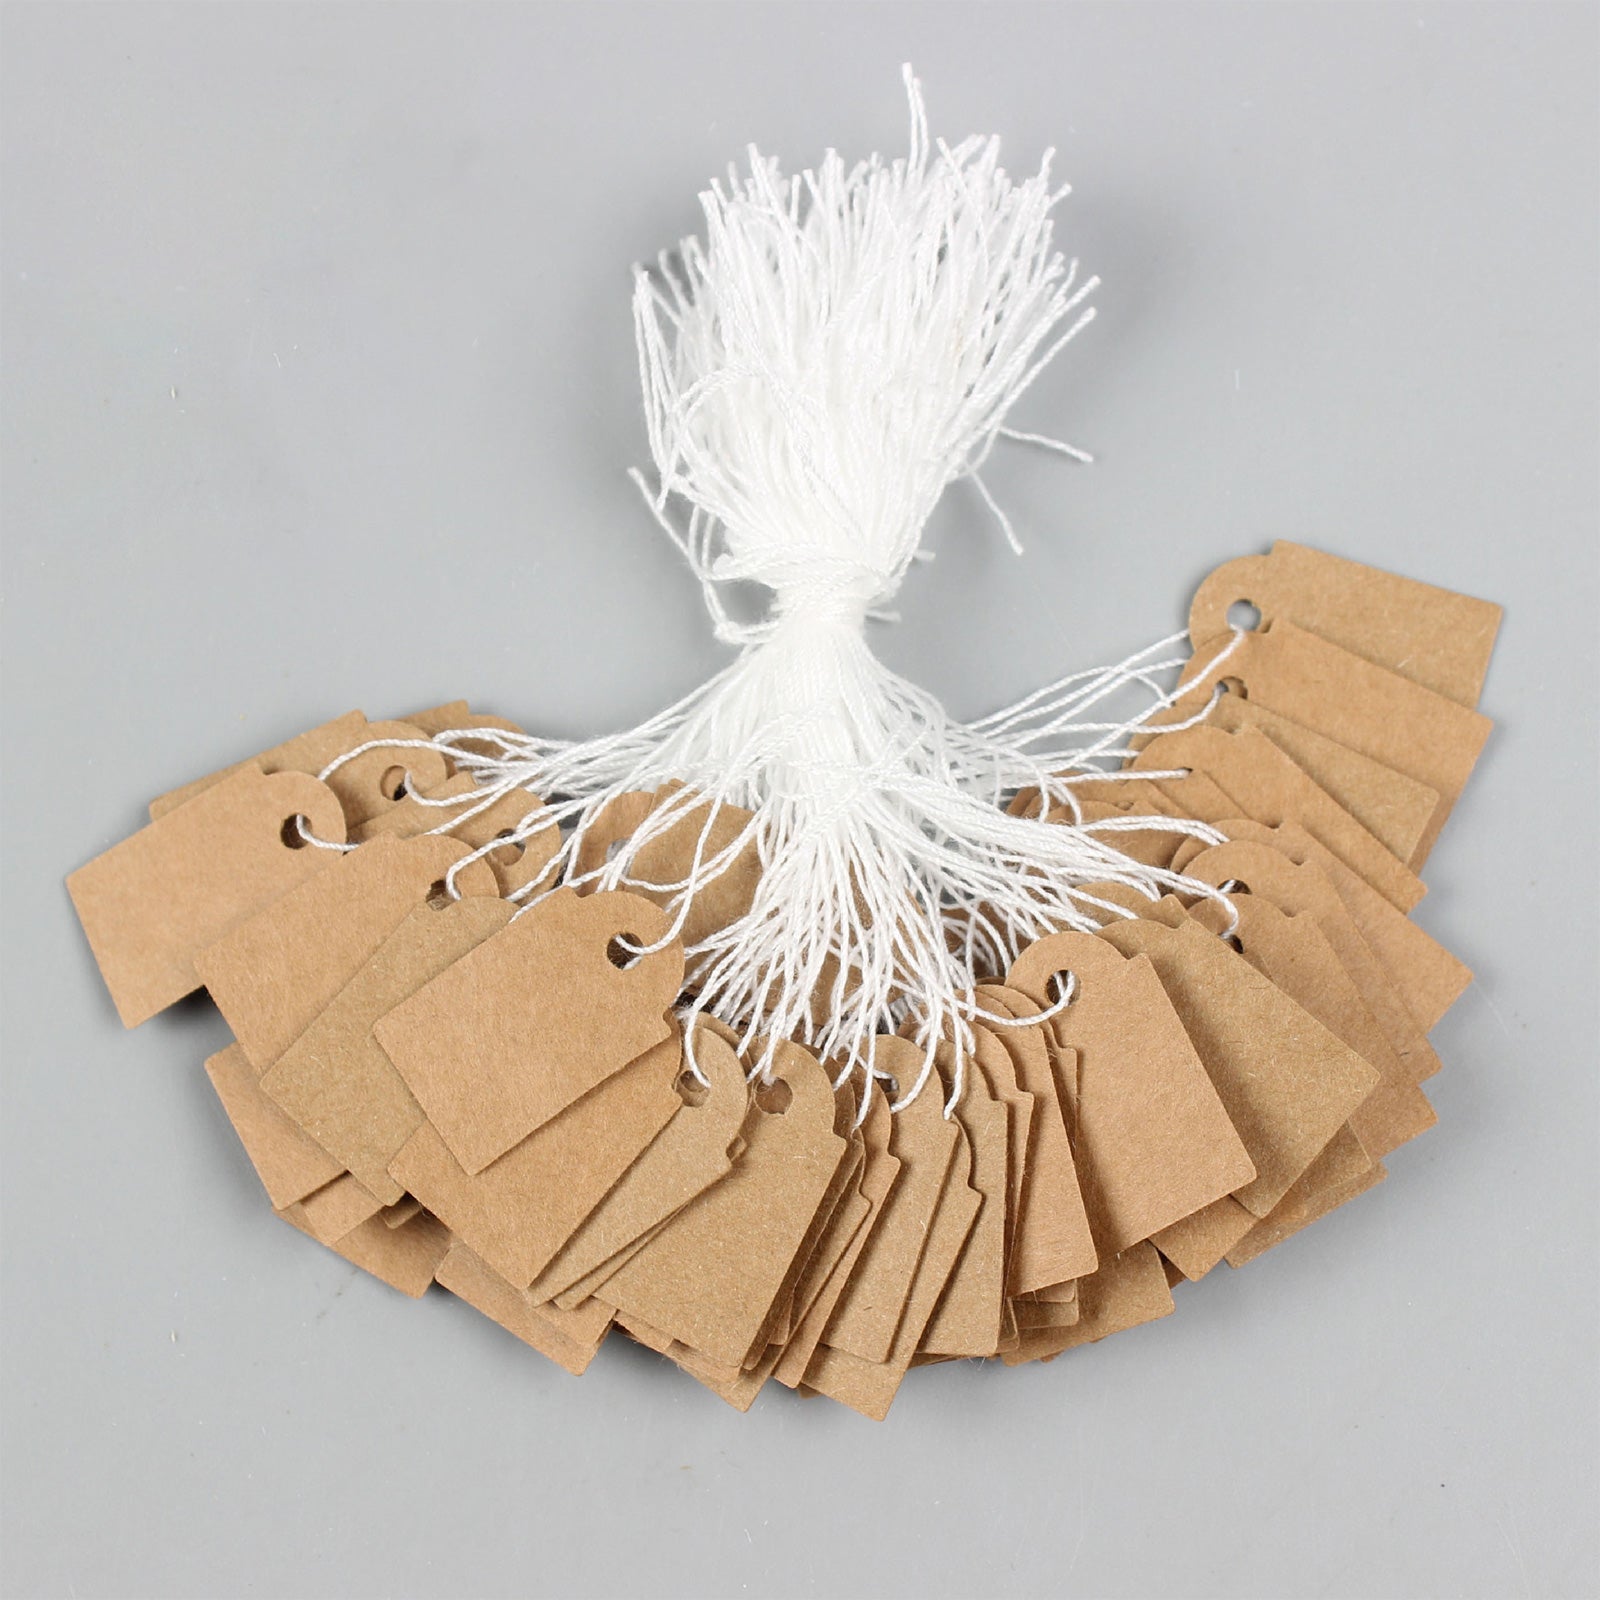 Warehouse Tag Accessories - Elastic Knotted Strings